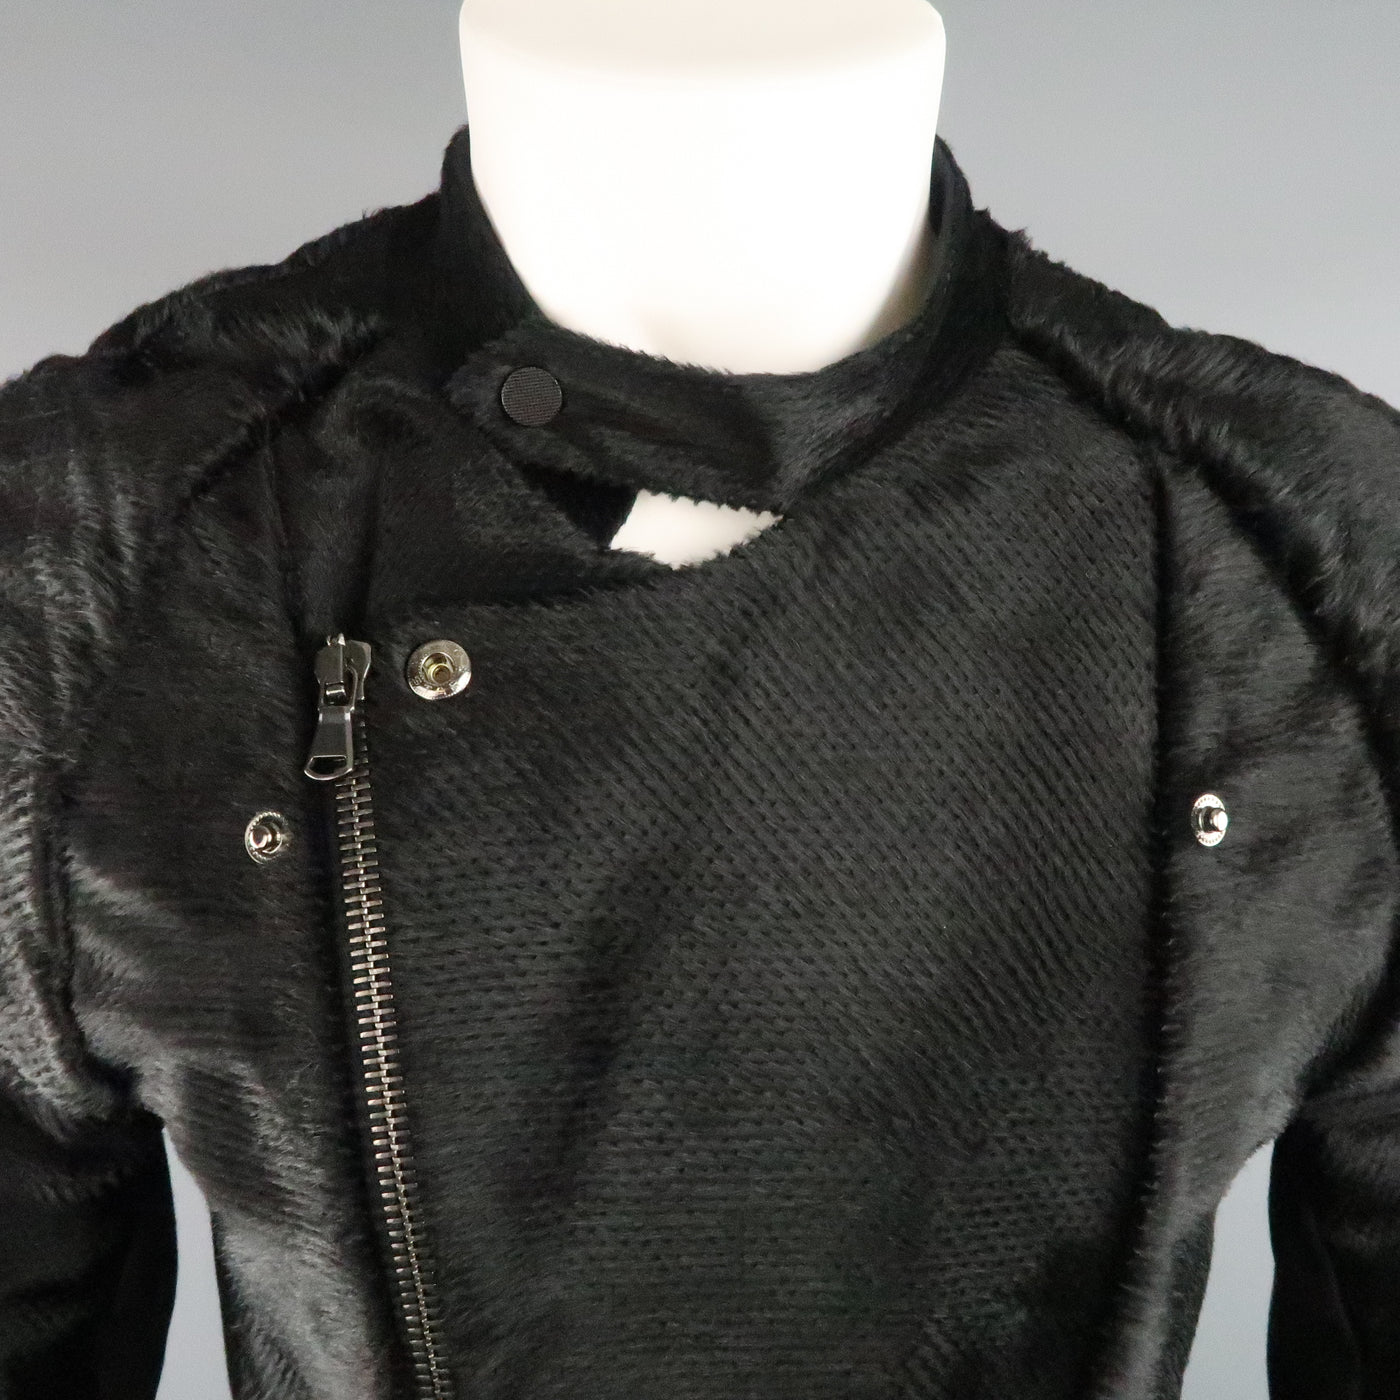 BAJA EAST Size M Black Perforated Ponyhair Leather and Twill Biker Jacket